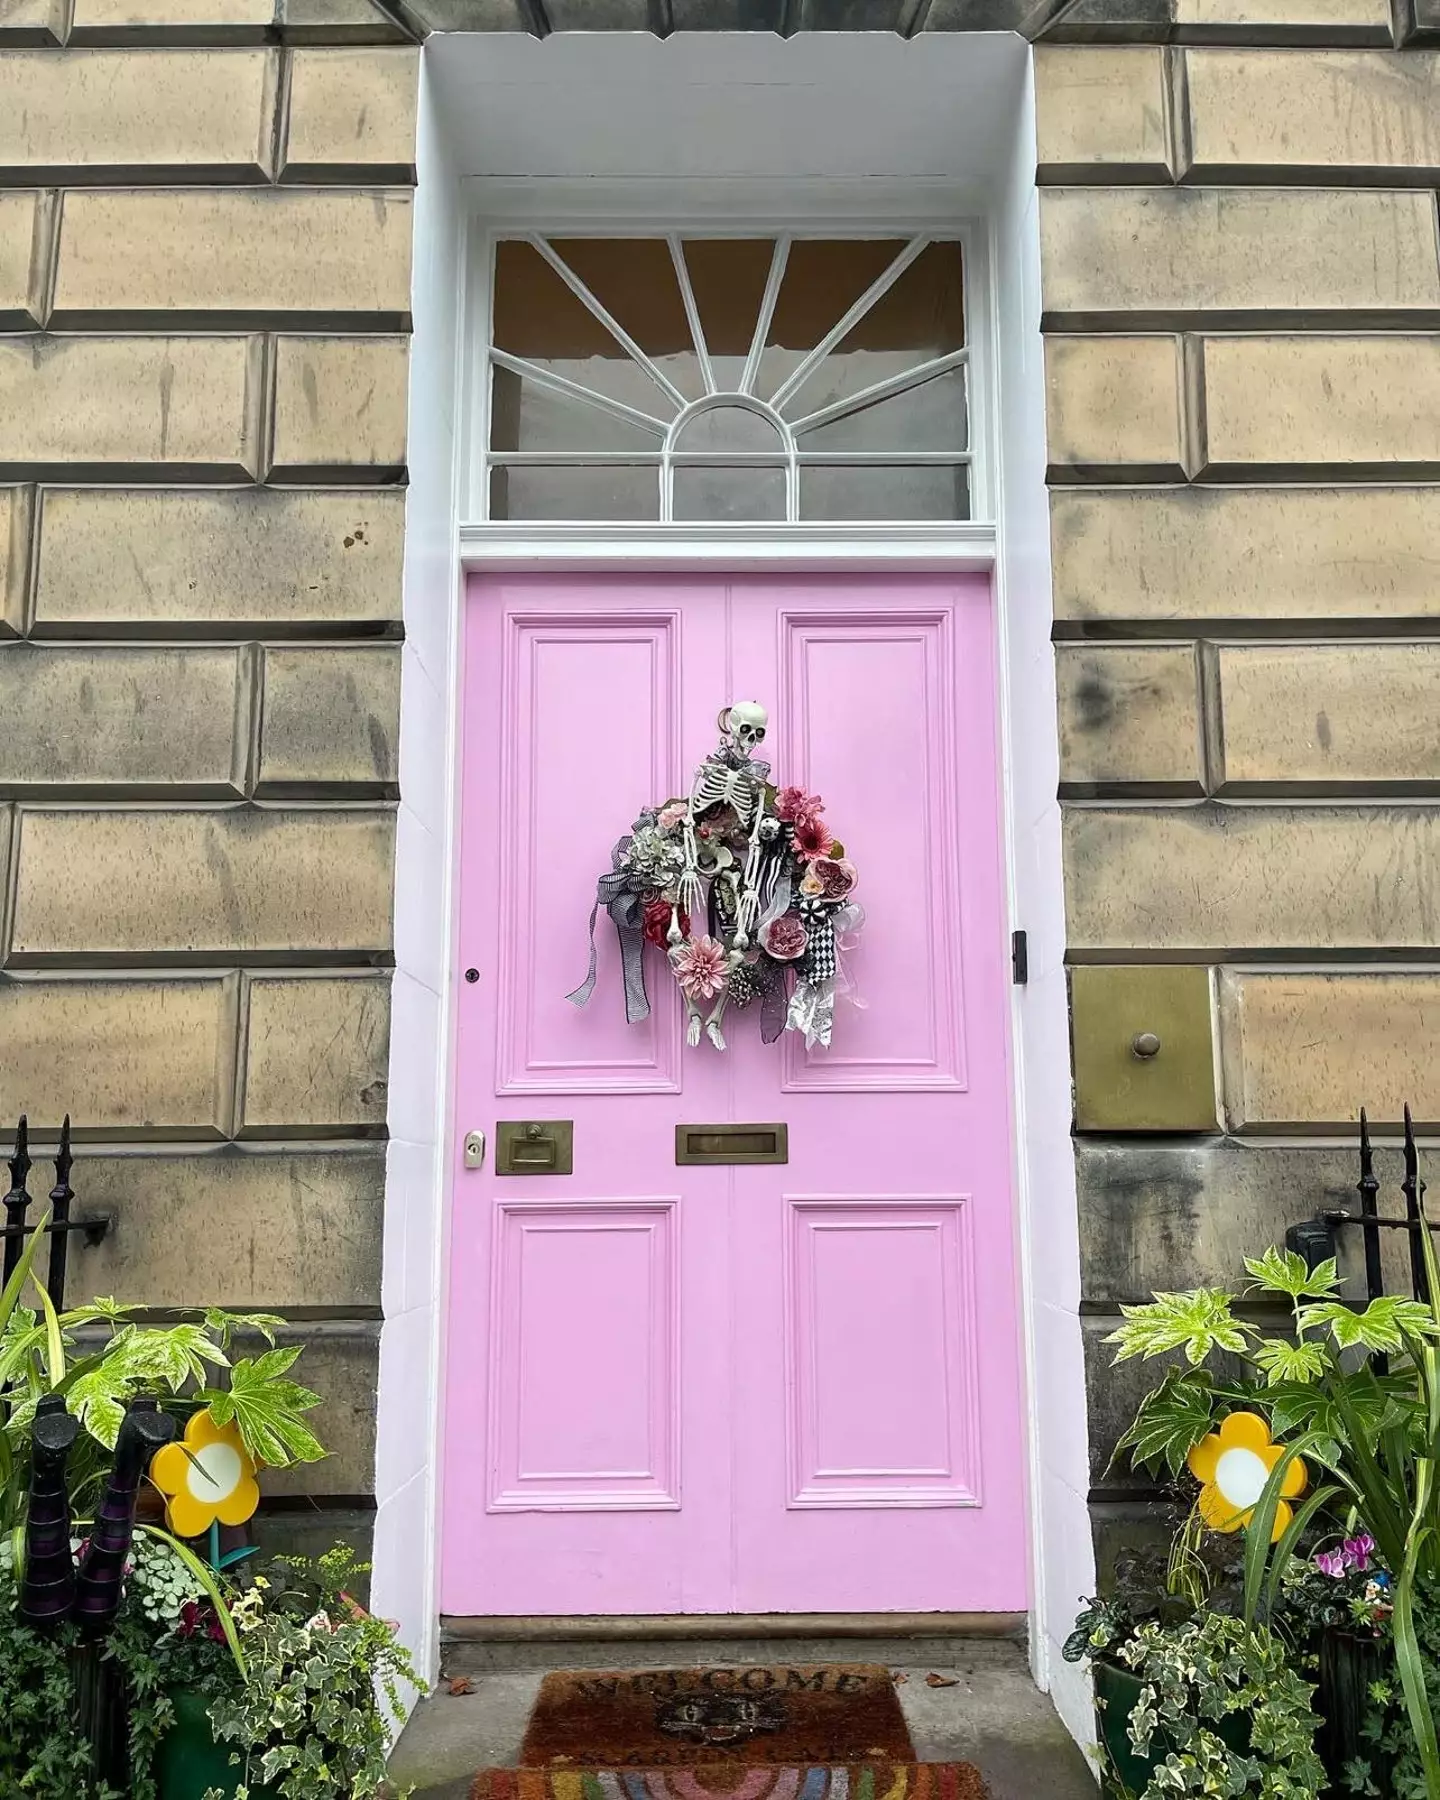 The pink door was deemed not in keeping with the area's heritage.